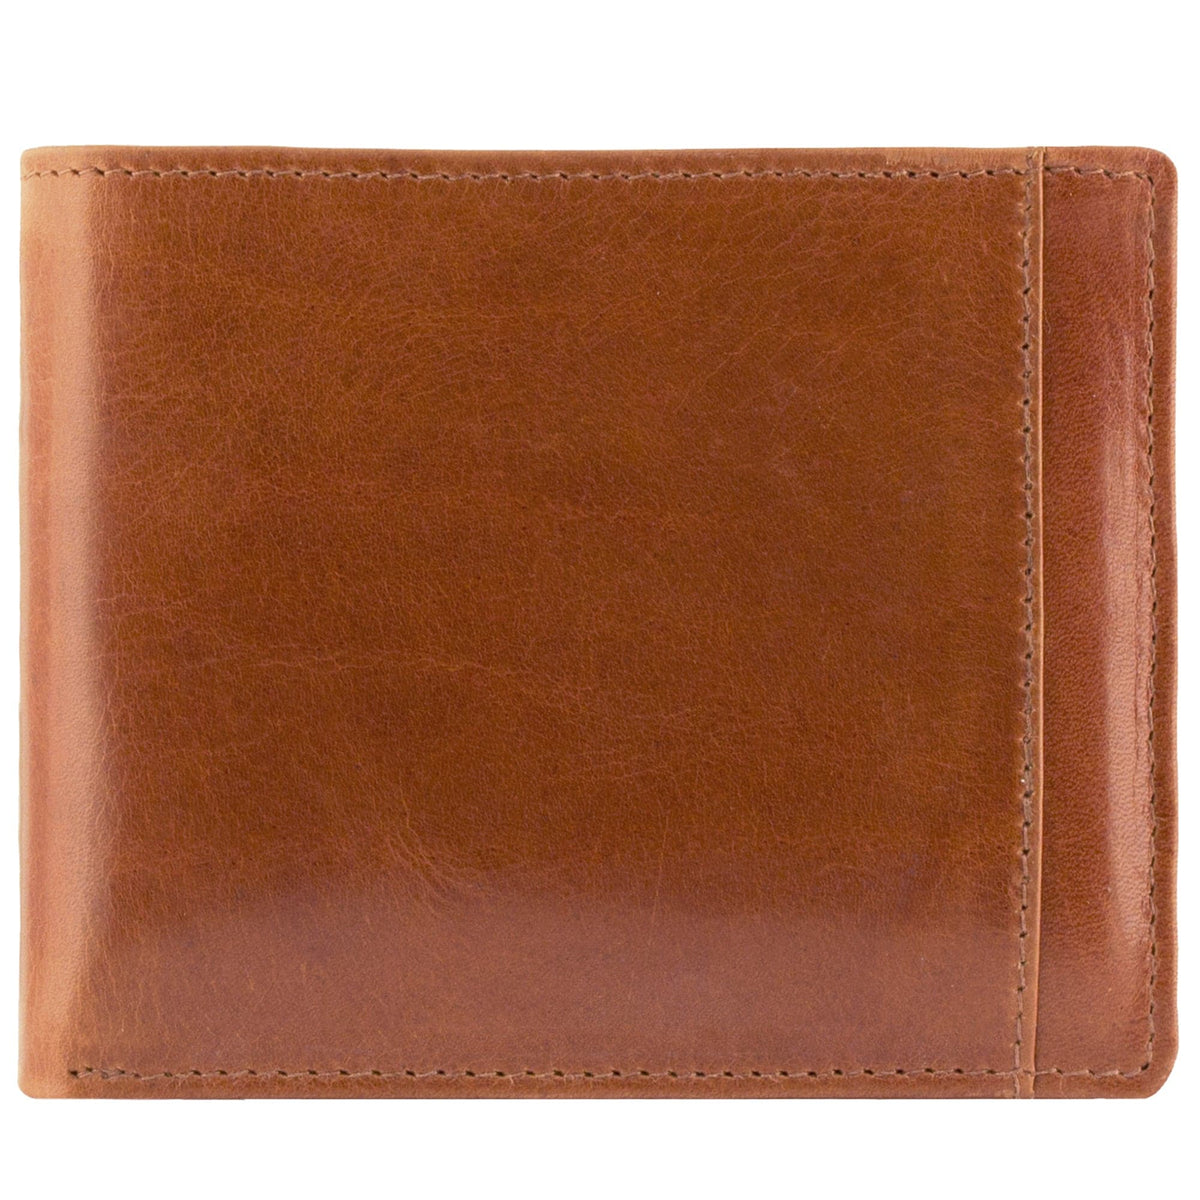 Mancini Casablanca Men's RFID Secure Billfold with Removable Passcase